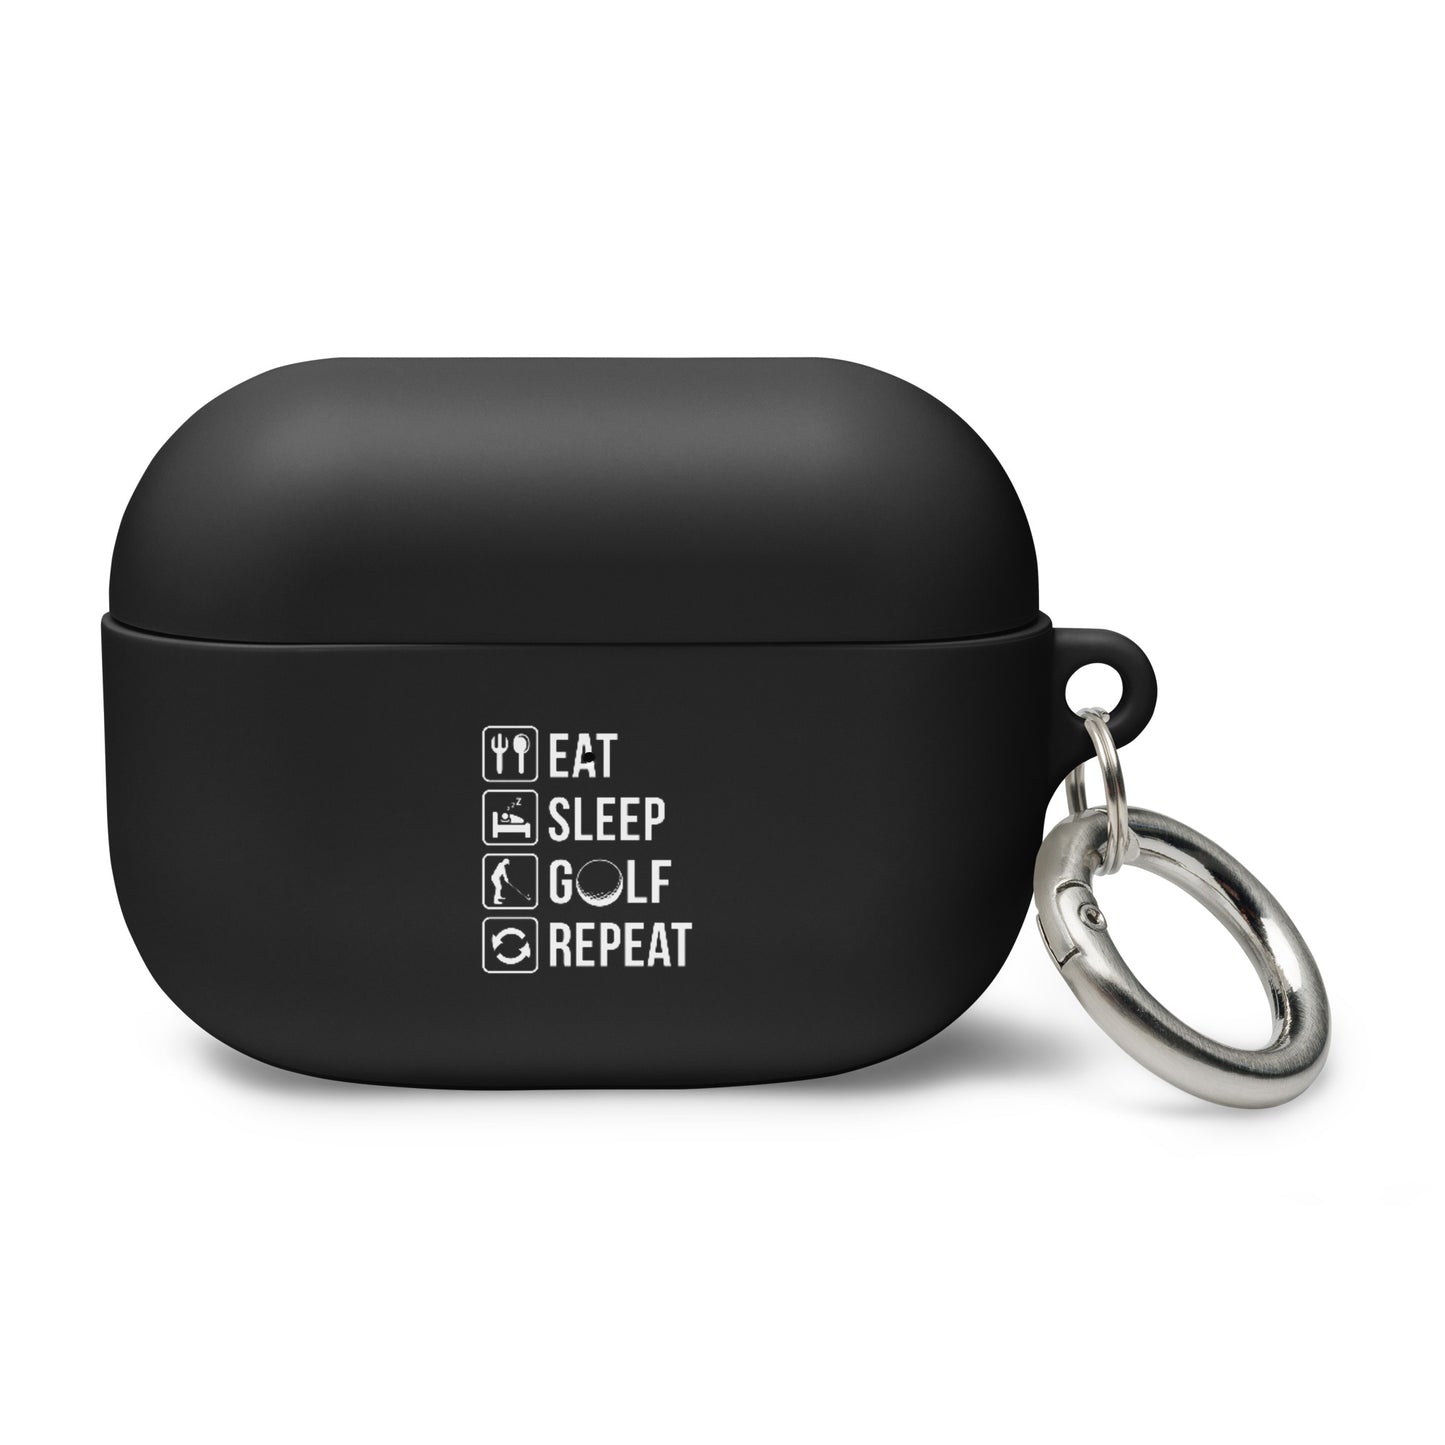 Eat, Sleep, Golf, Repeat AirPods Case